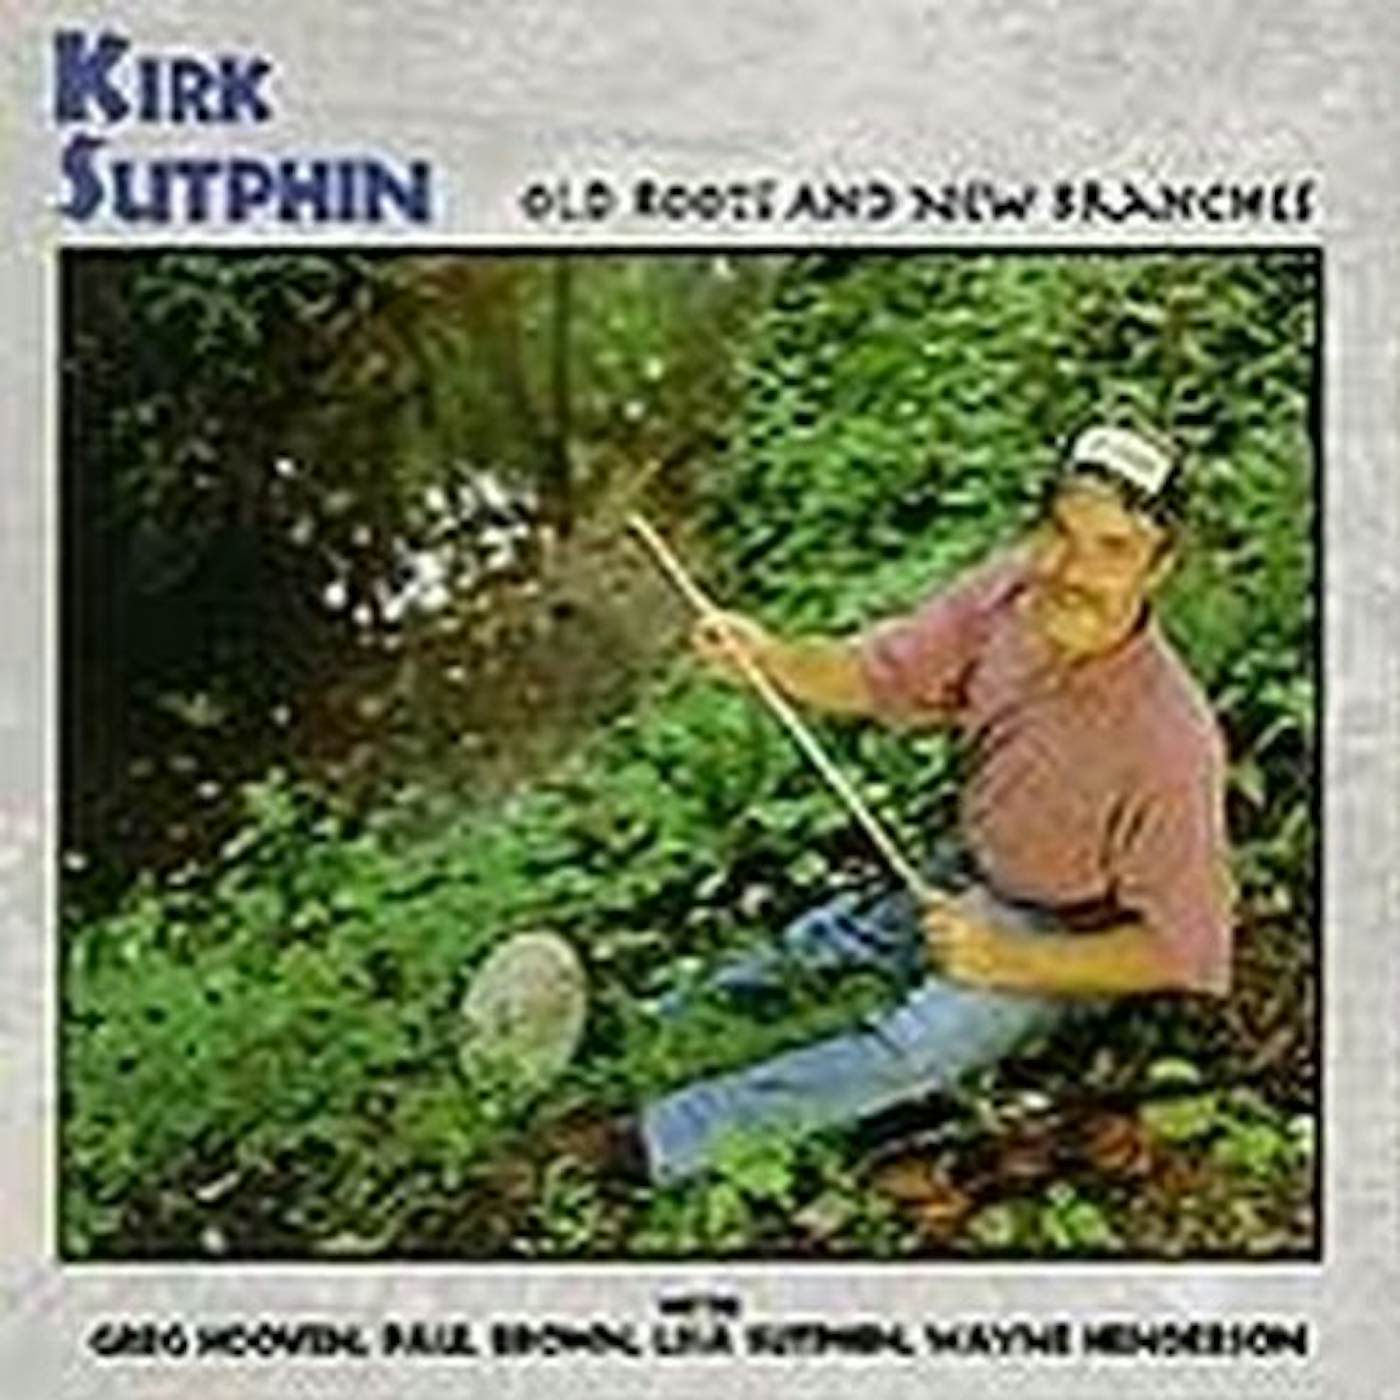 Kirk Sutphin OLD ROOTS & NEW BRANCHES CD